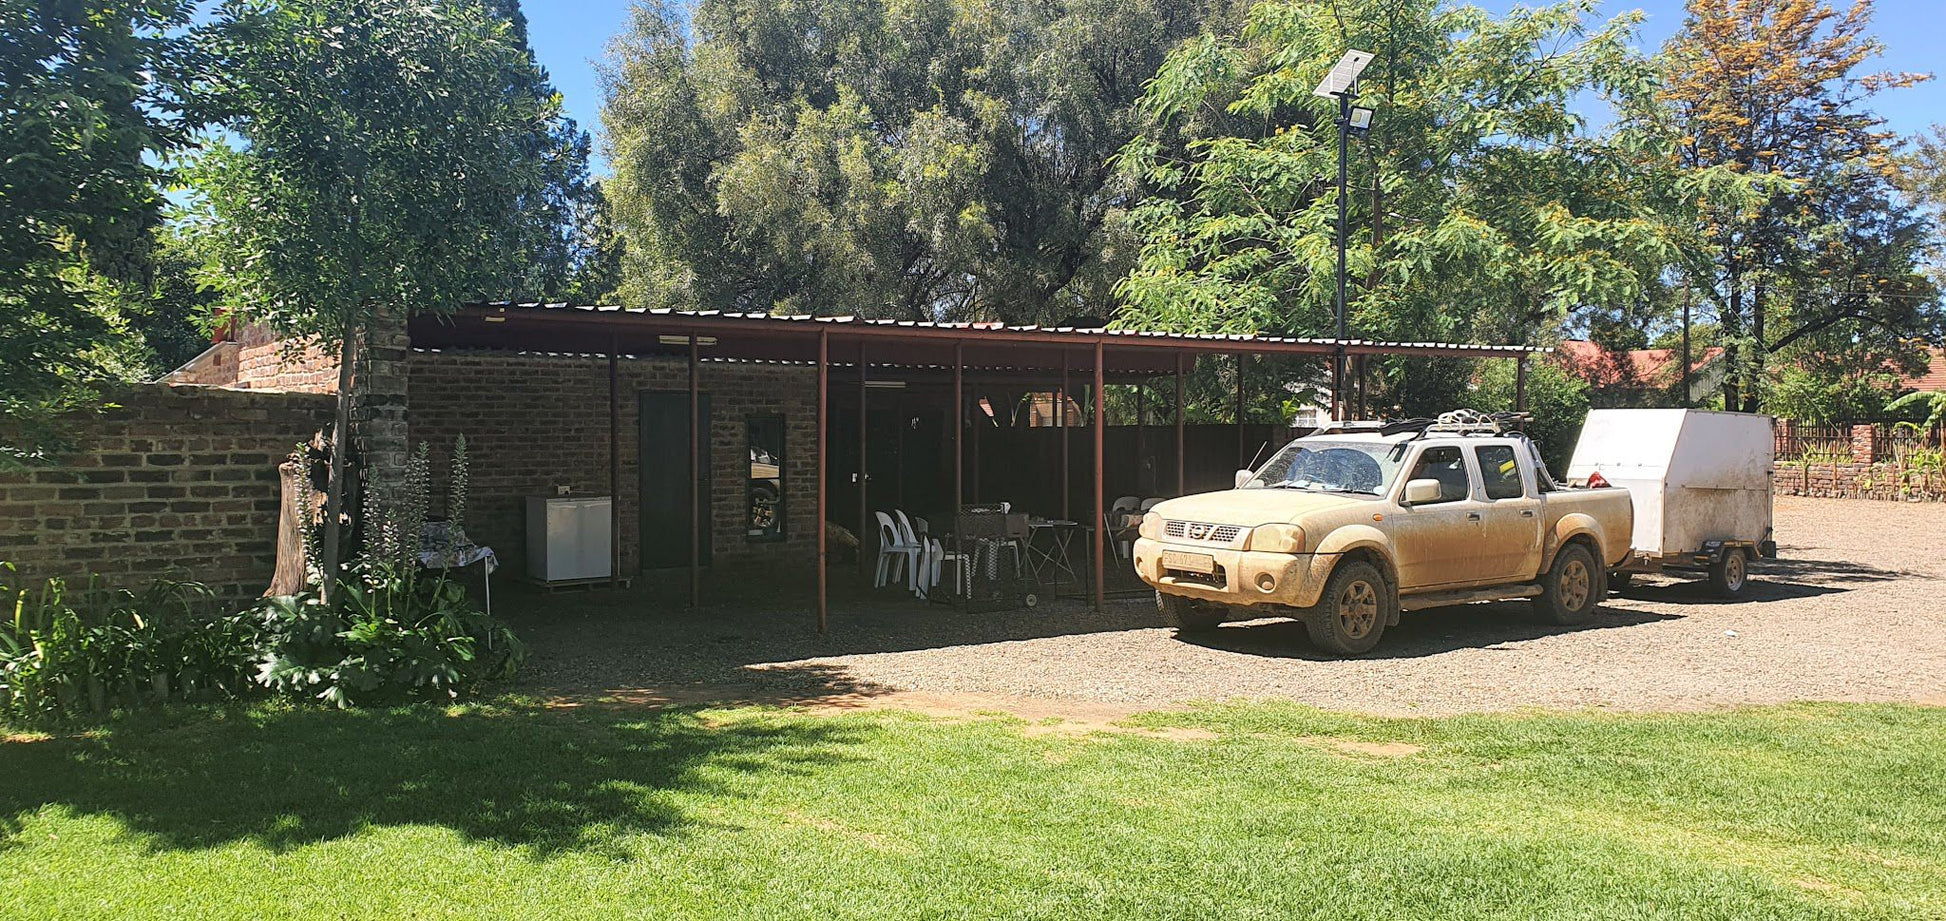 Sleepers Guest Lodge Bloemhof North West Province South Africa Car, Vehicle